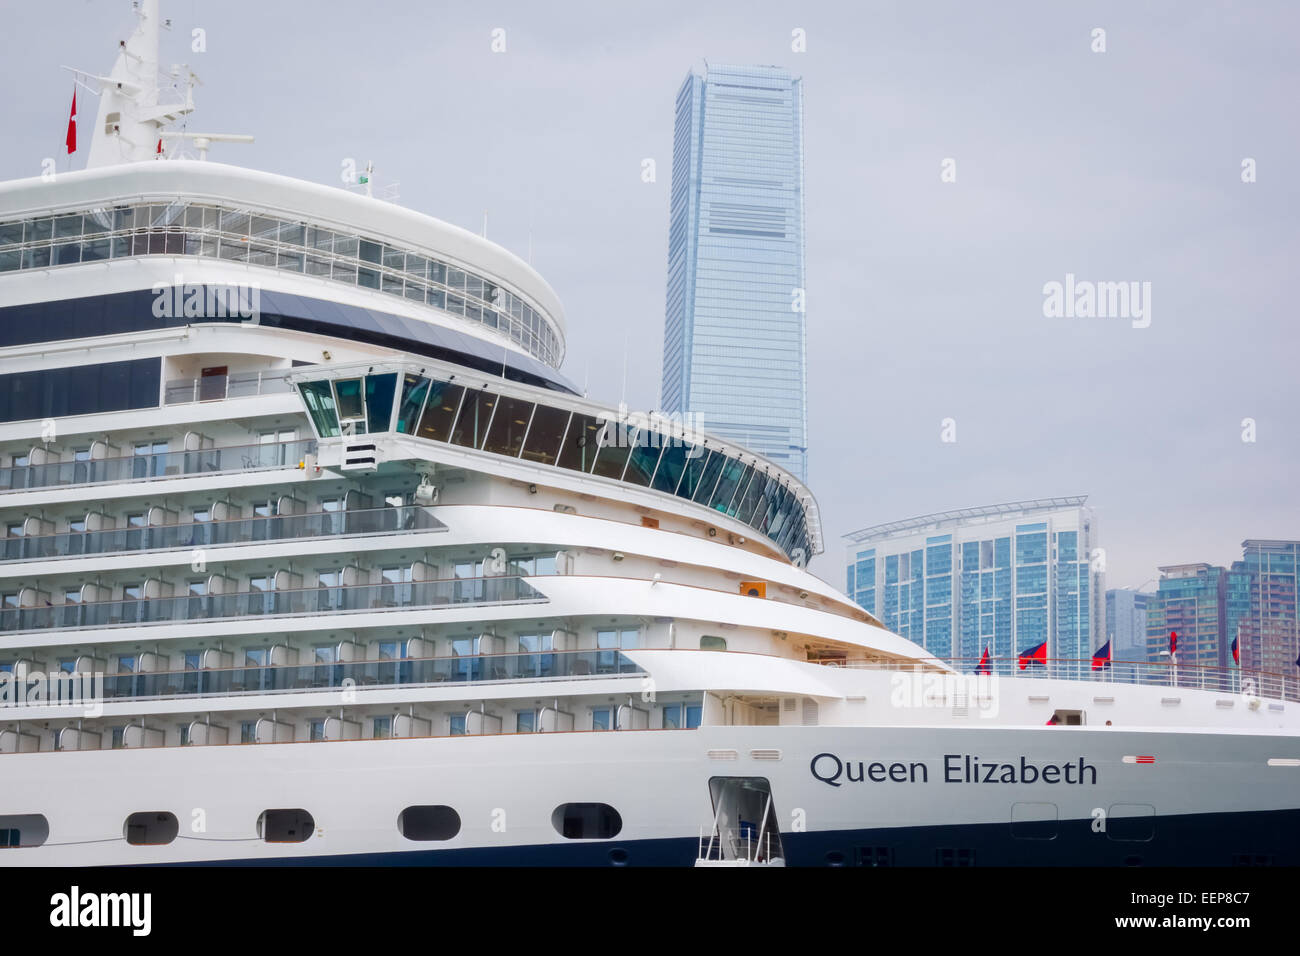 Cunard's Queen Elizabeth cruise ship docked in Hong Kong with the International Commerce Center ICC in the background Stock Photo